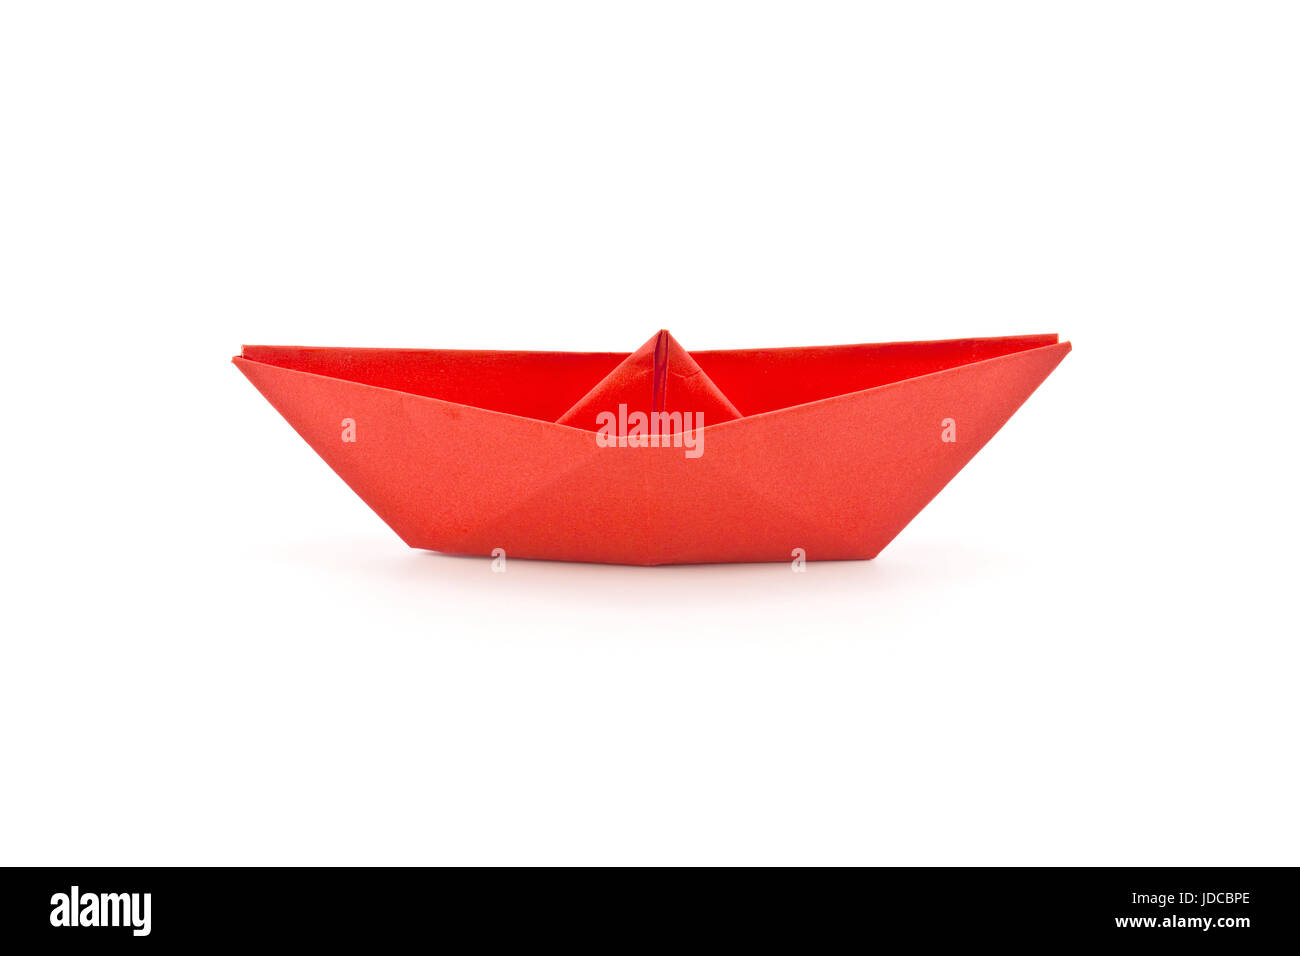 red paper boat isolated on white background Stock Photo